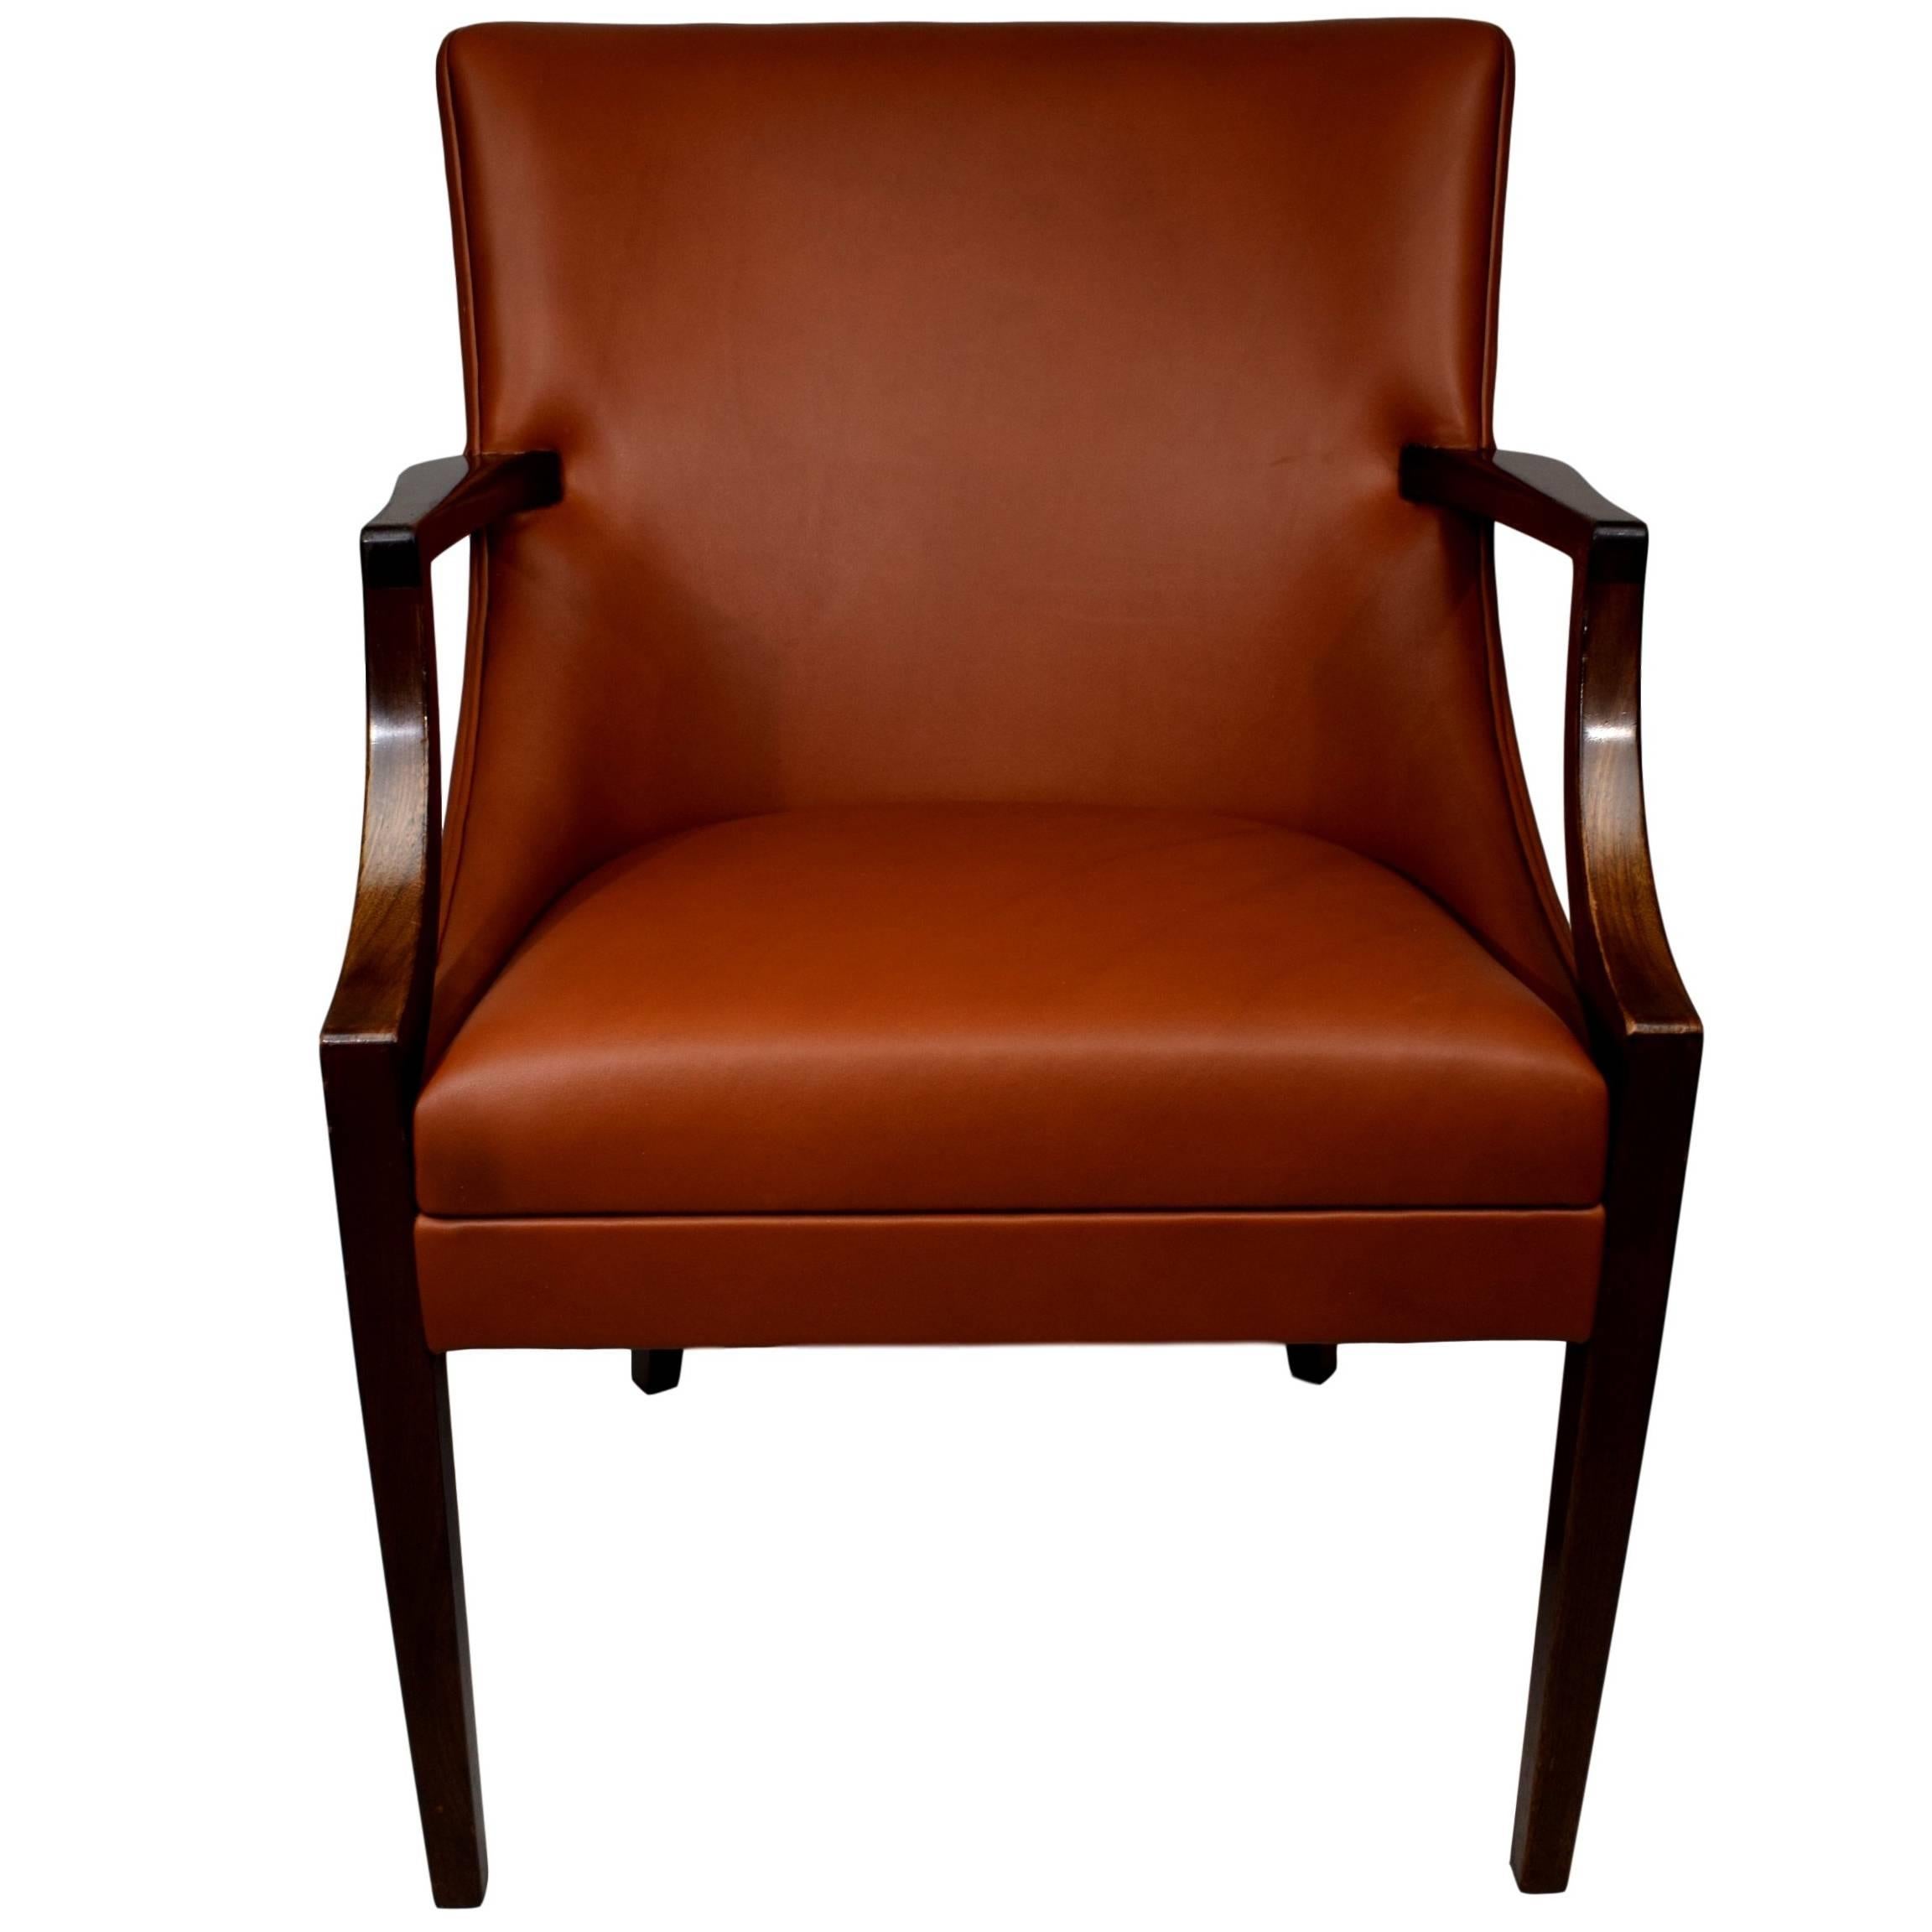 Early Danish Midcentury Aniline Leather Armchair Ole Wanscher, A.J. Iversen For Sale